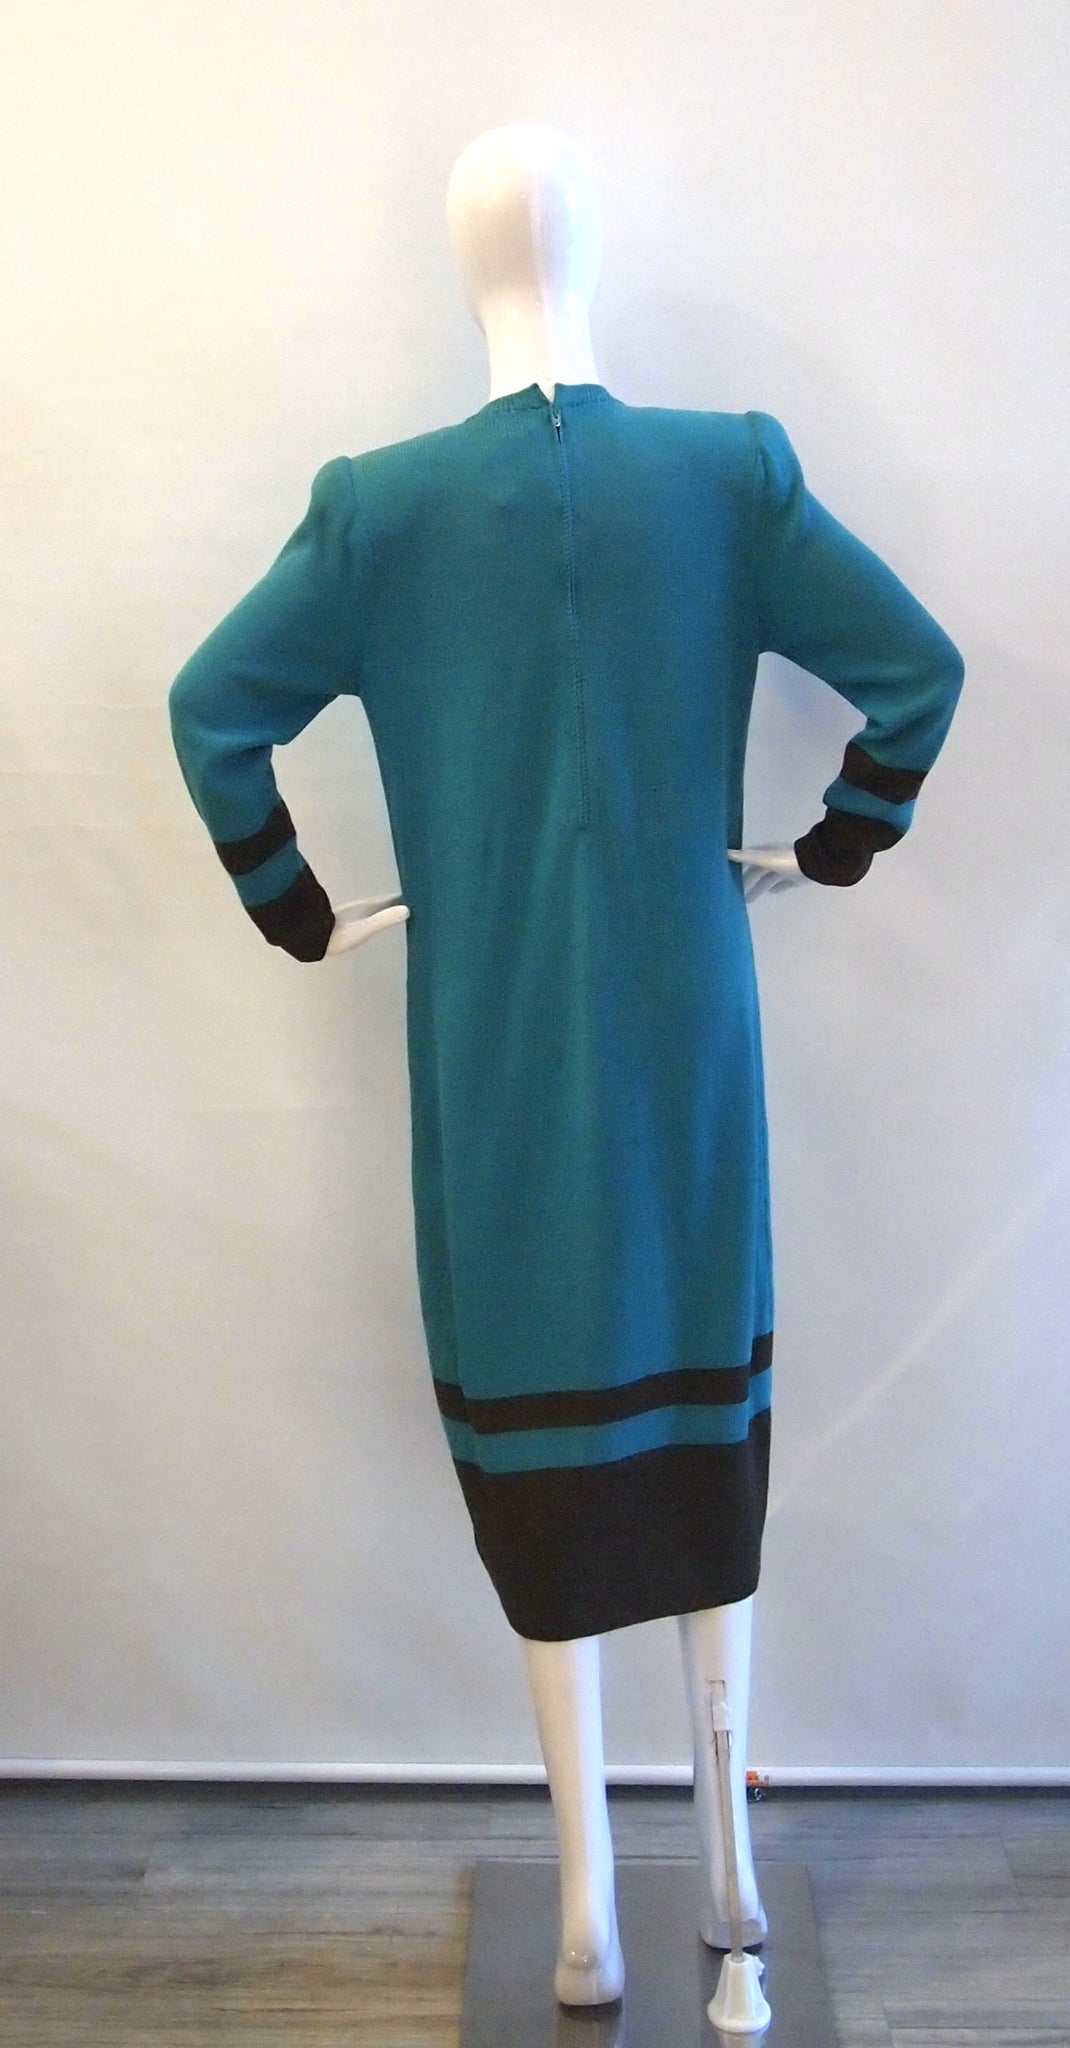 Vintage St. John turquoise green wool knit dress with brown trim